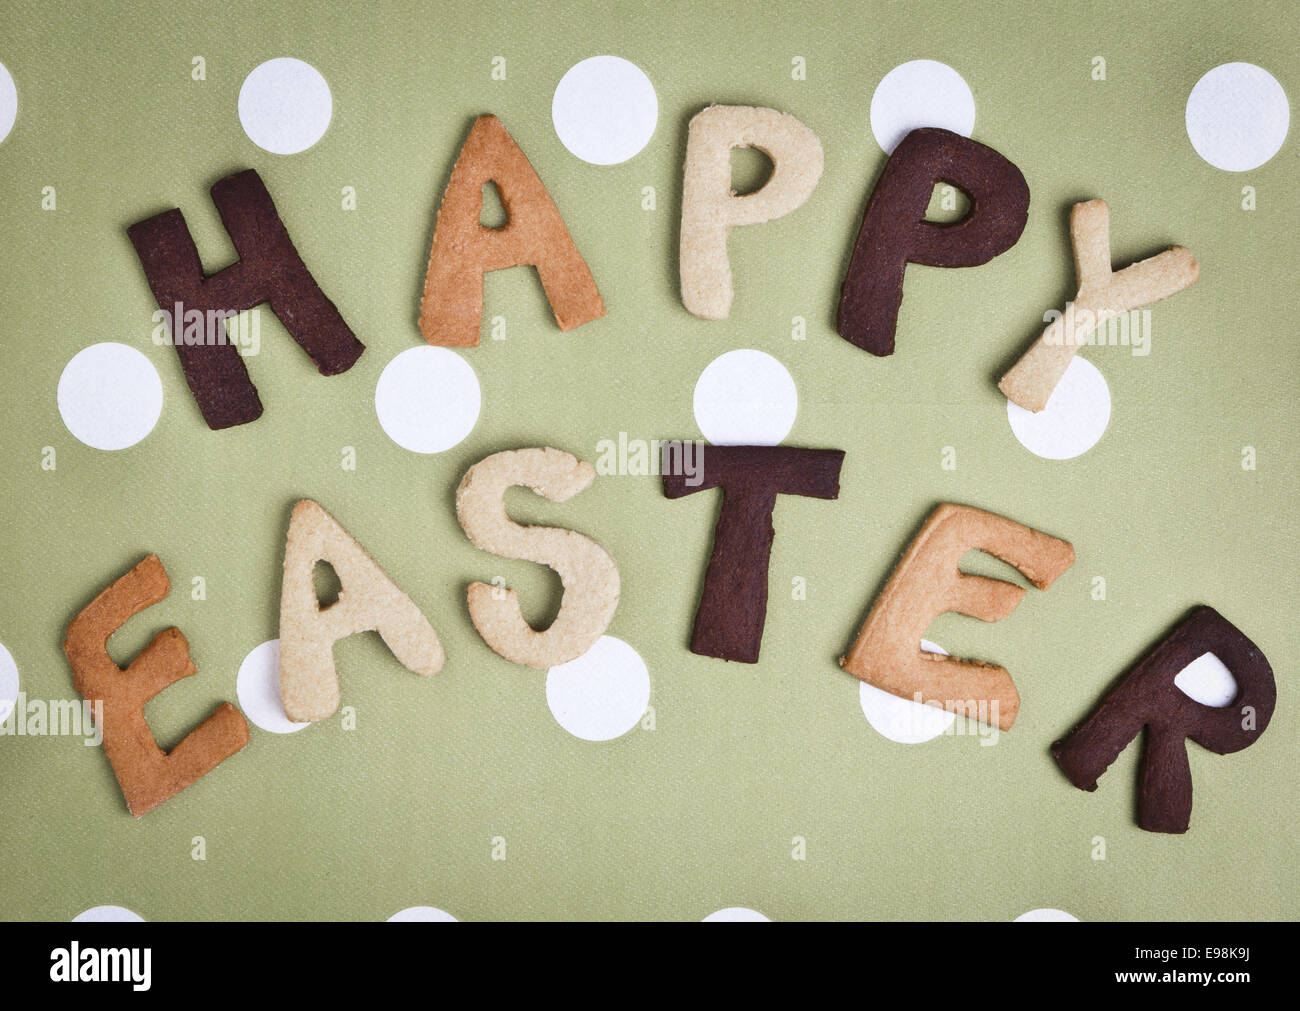 Happy Easter Card On grey green fabric. Words HAPPY EASTER on a tureen fabric background, festive card for Easter holiday. Stock Photo